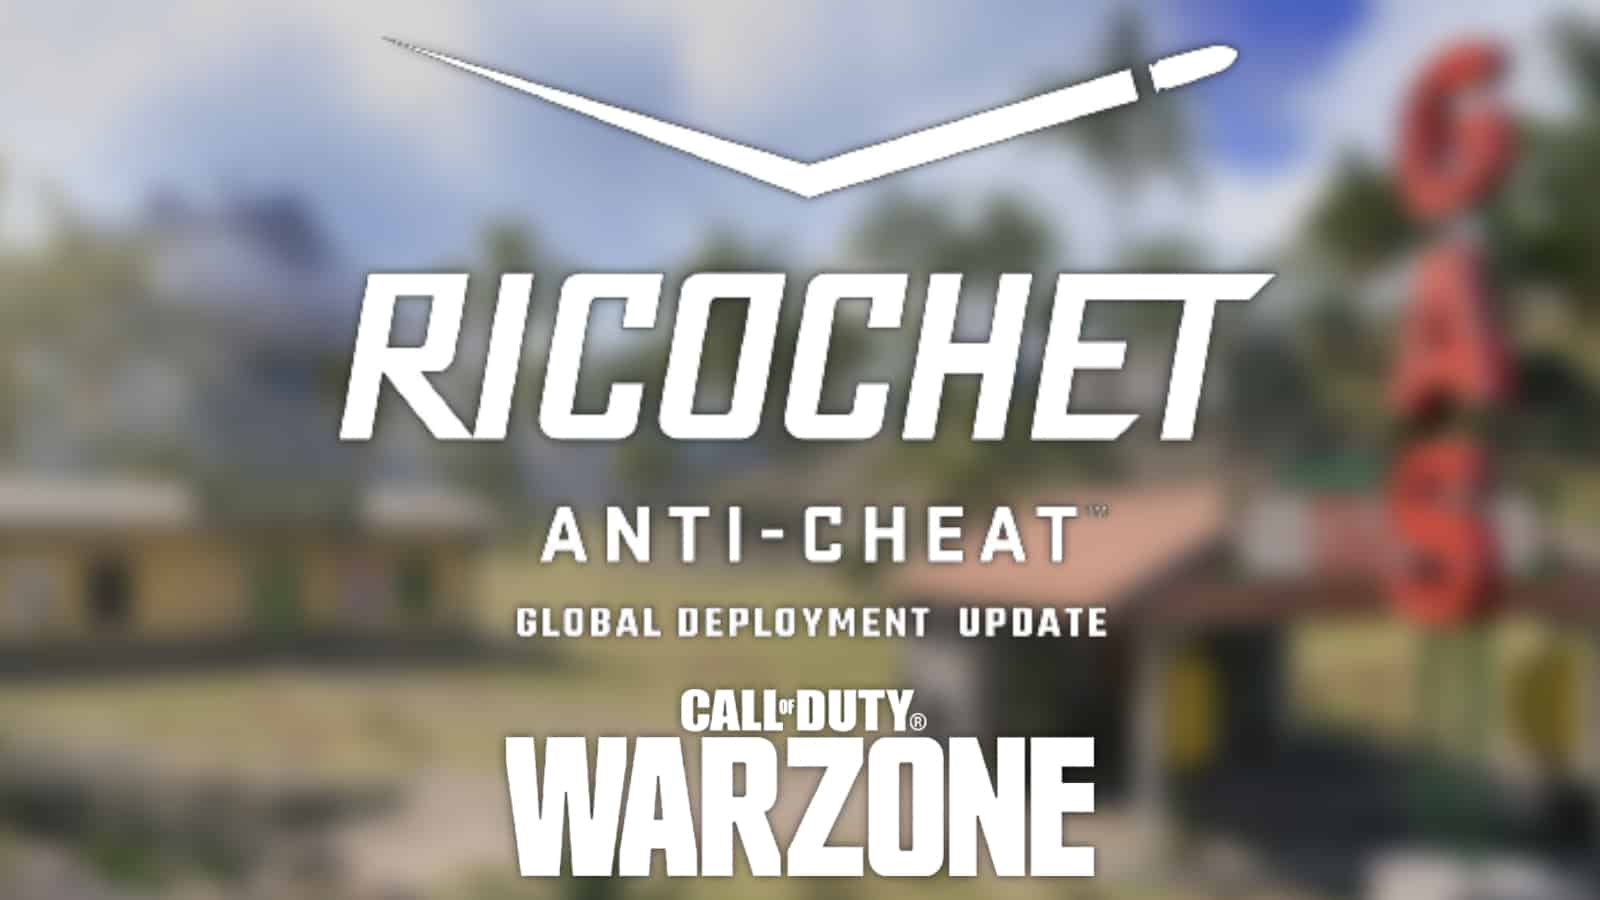 Warzone players satisfied with RICOCHET anti-cheat "overwhelming success"